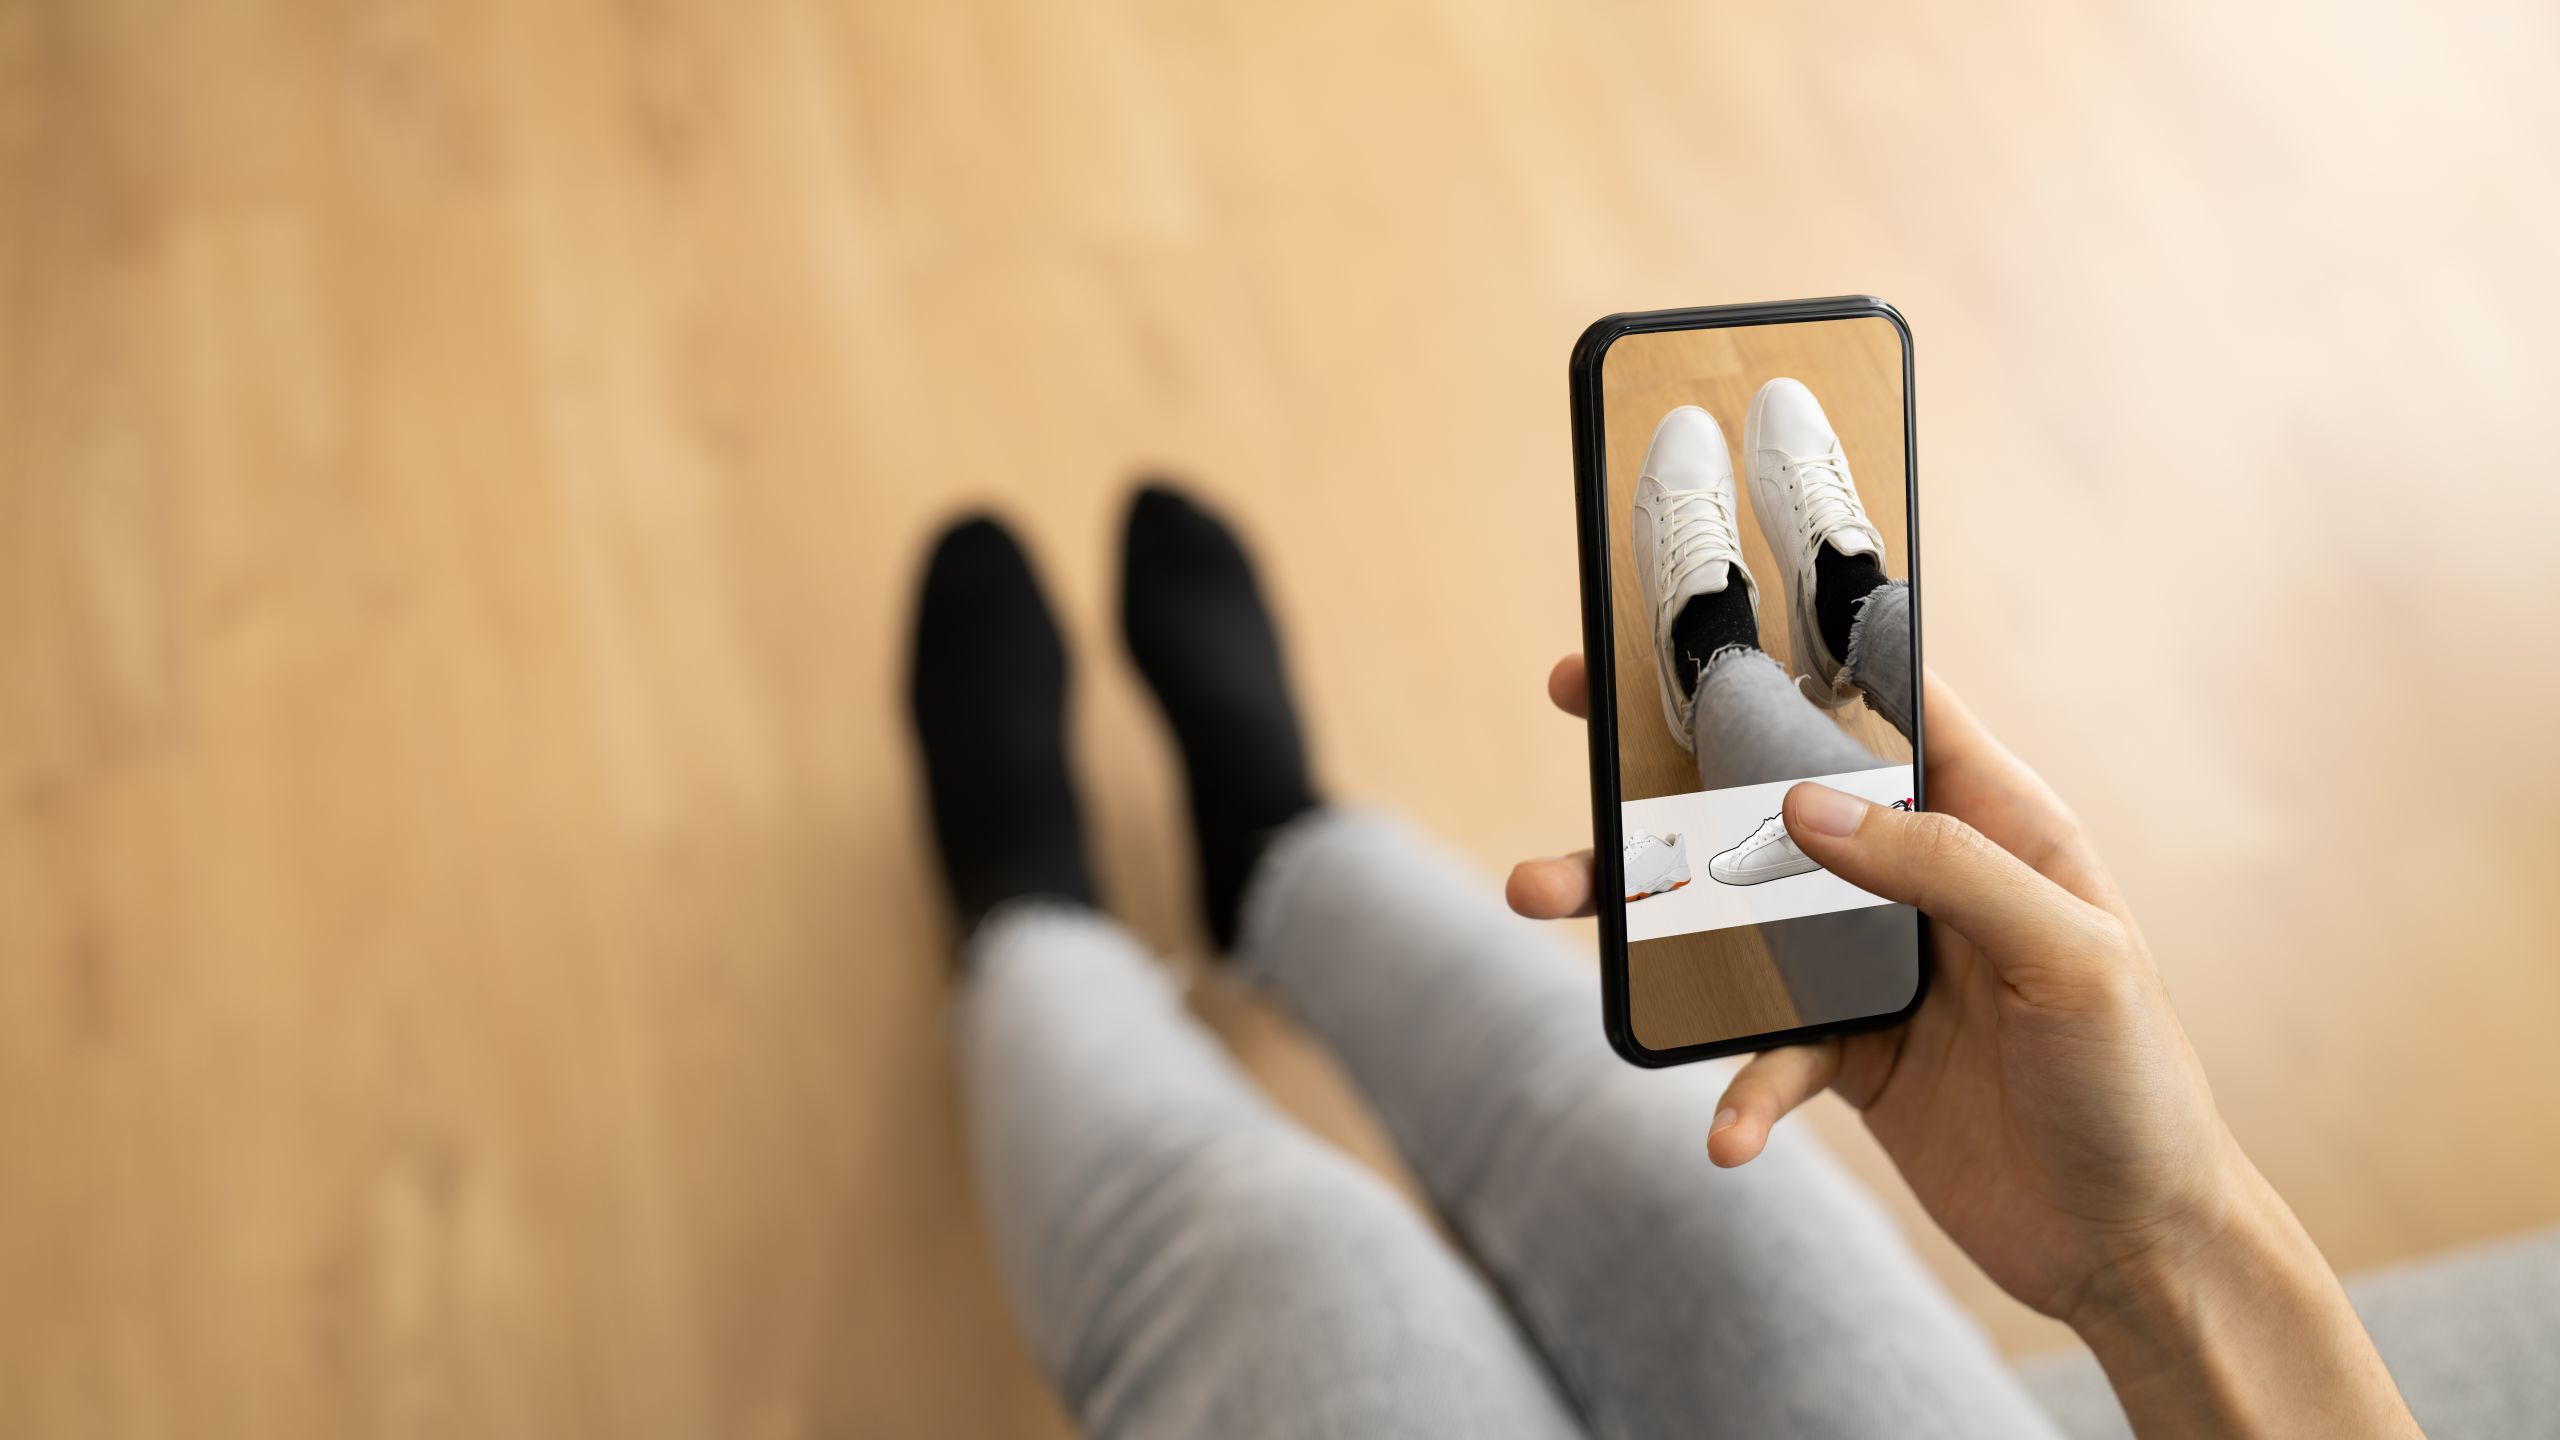 an image of a woman trying on shoes using augmented reality